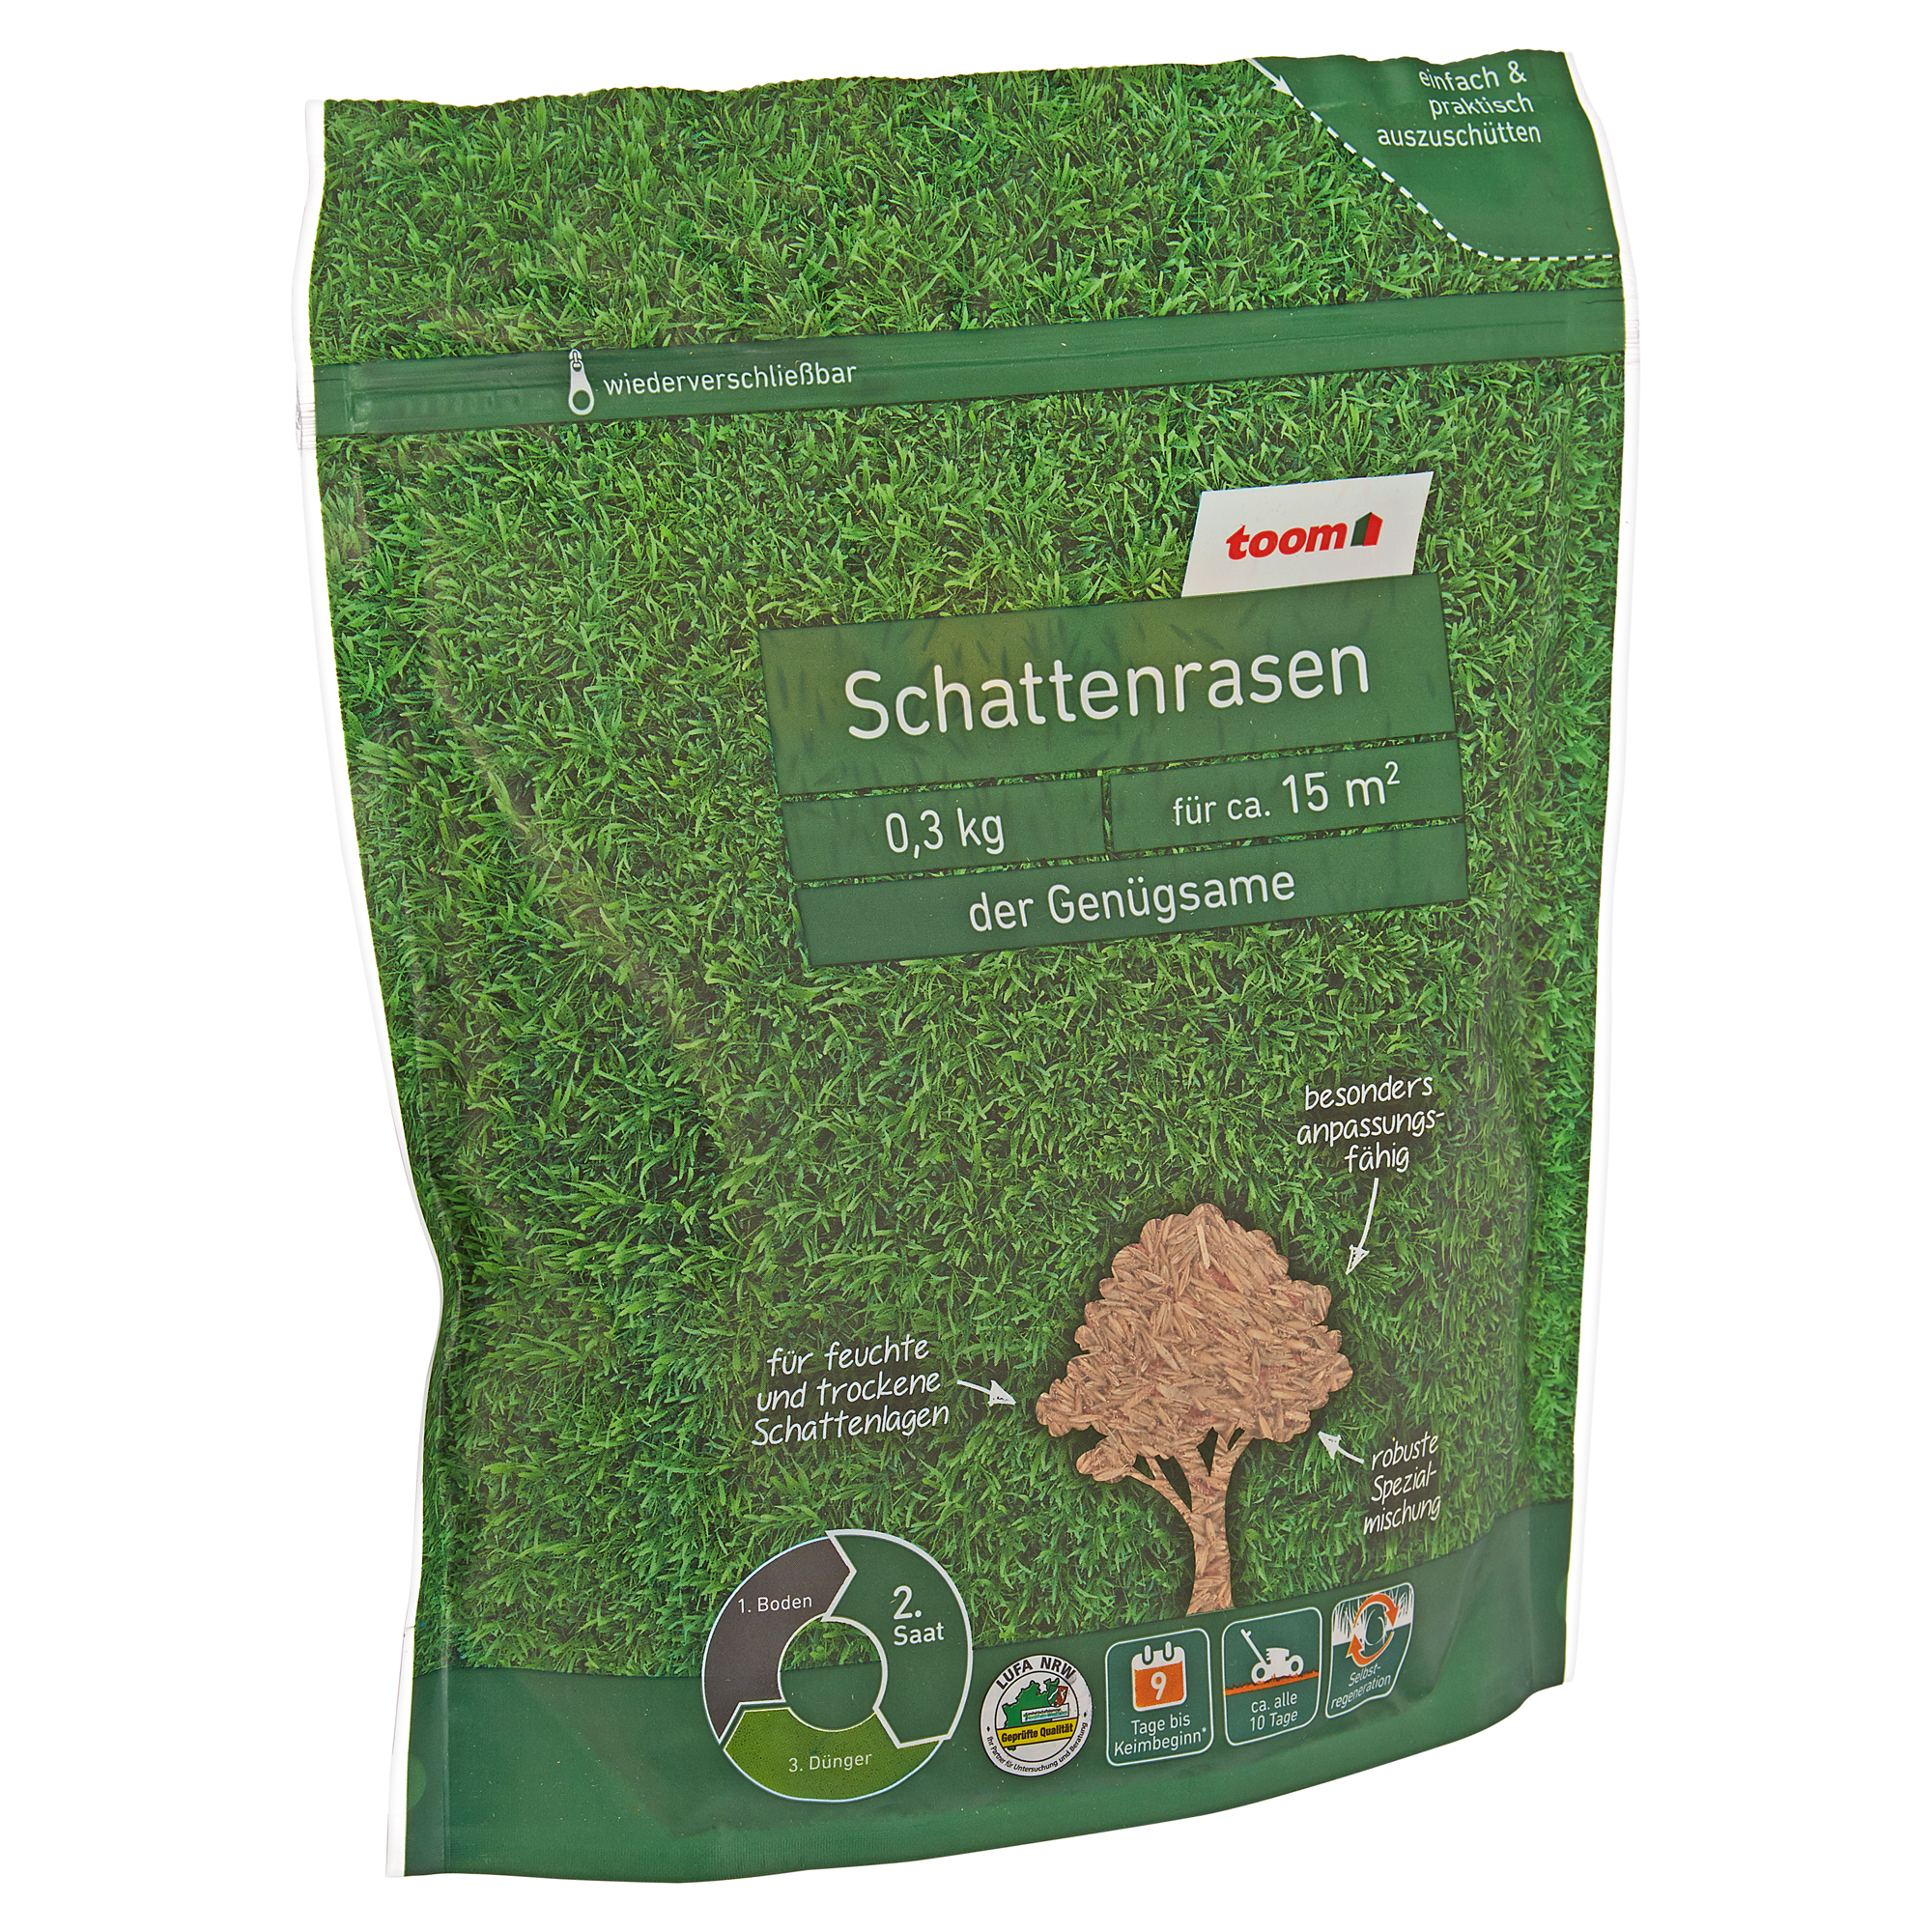 Schattenrasen 0,3 kg + product picture